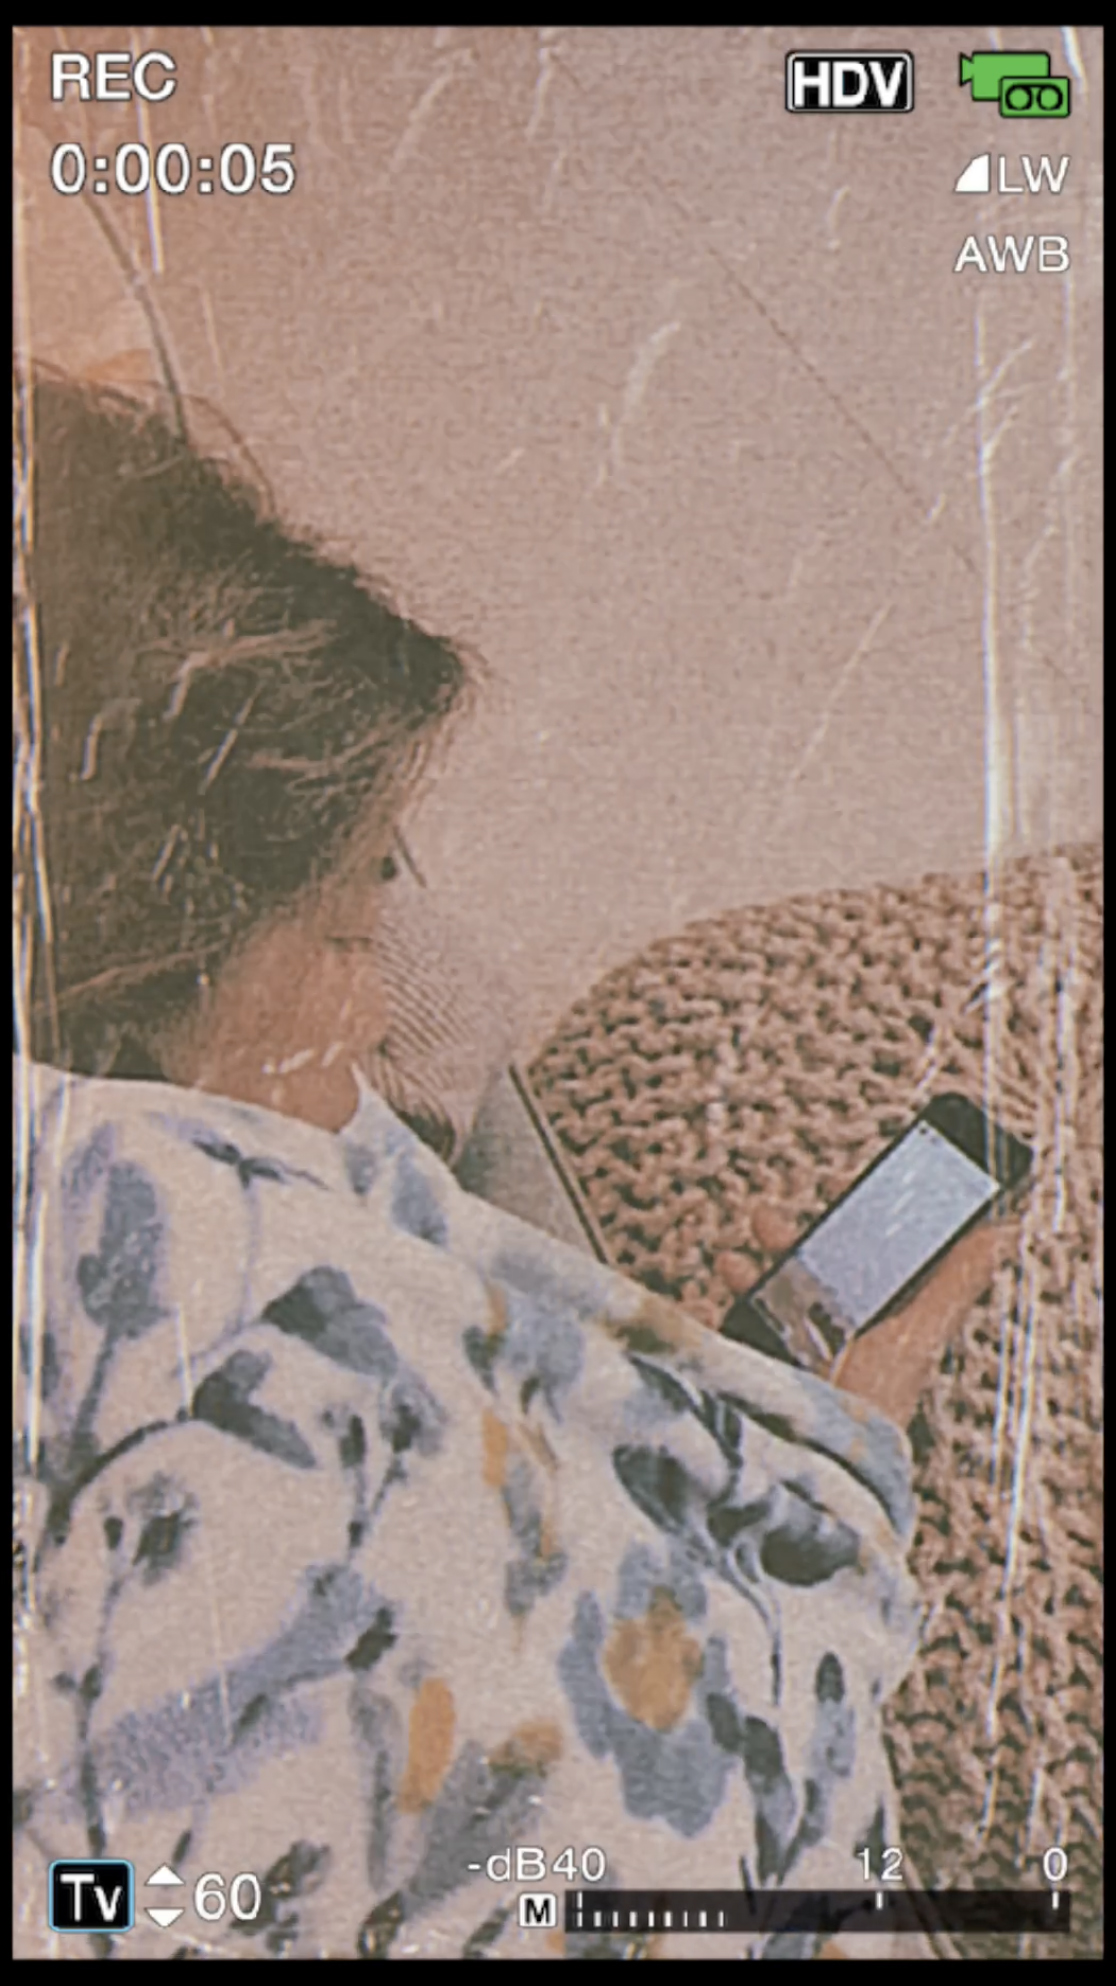 Video recording interface on a cell phone. Woman reclining and looking at a cell phone.